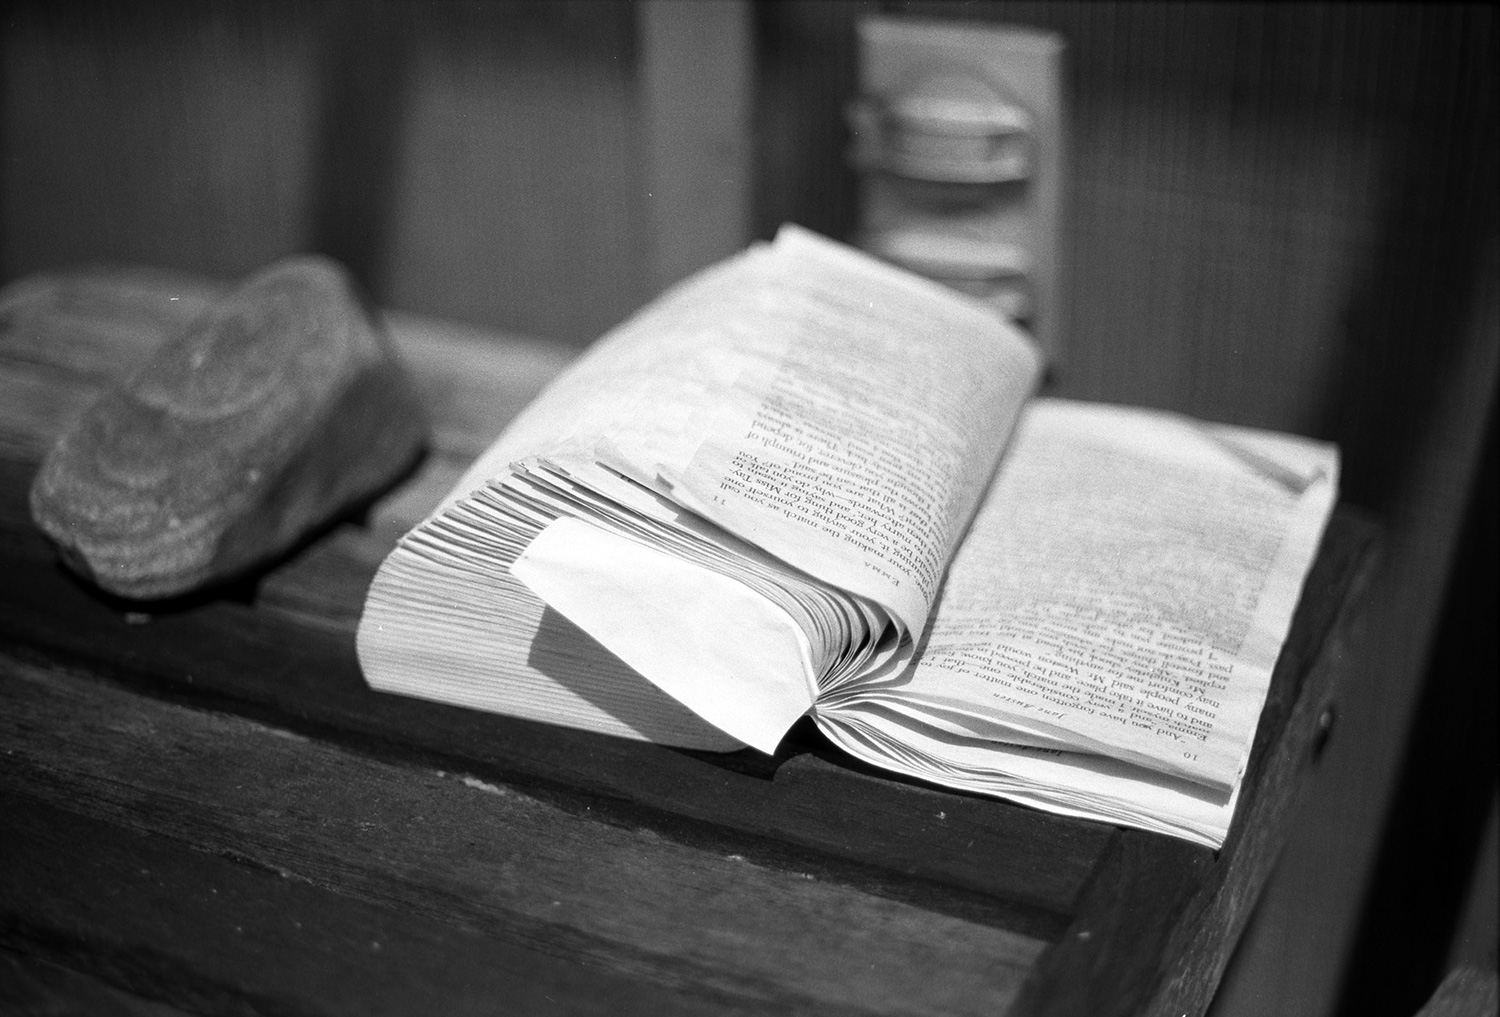 A scan of a black and white film photograph of a book that was left outside overnight, with pages wrinkled by the damp